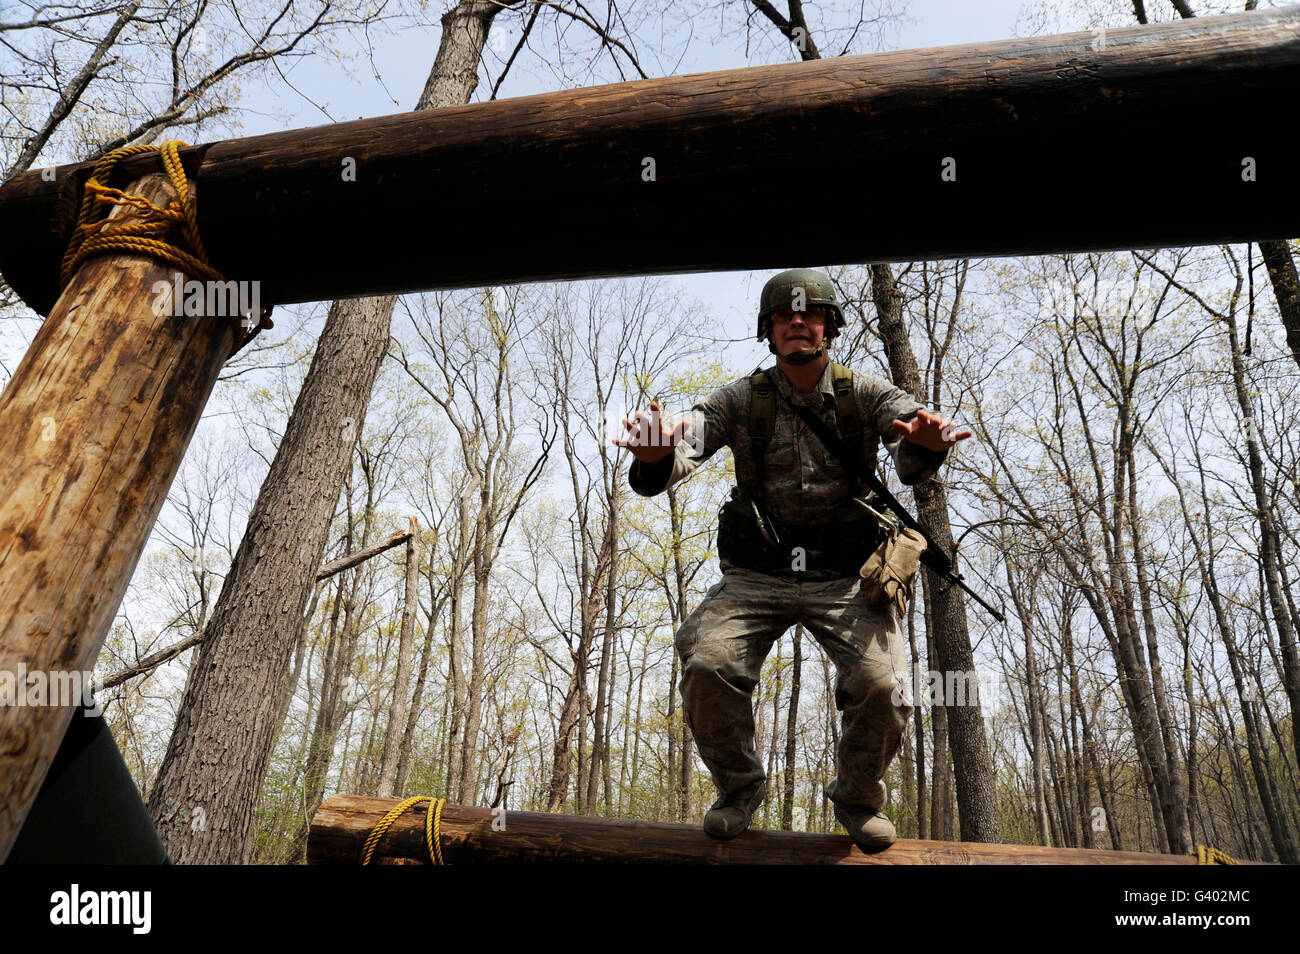 A U.S. Air Force Academy cadet on a obstacle course. Stock Photo